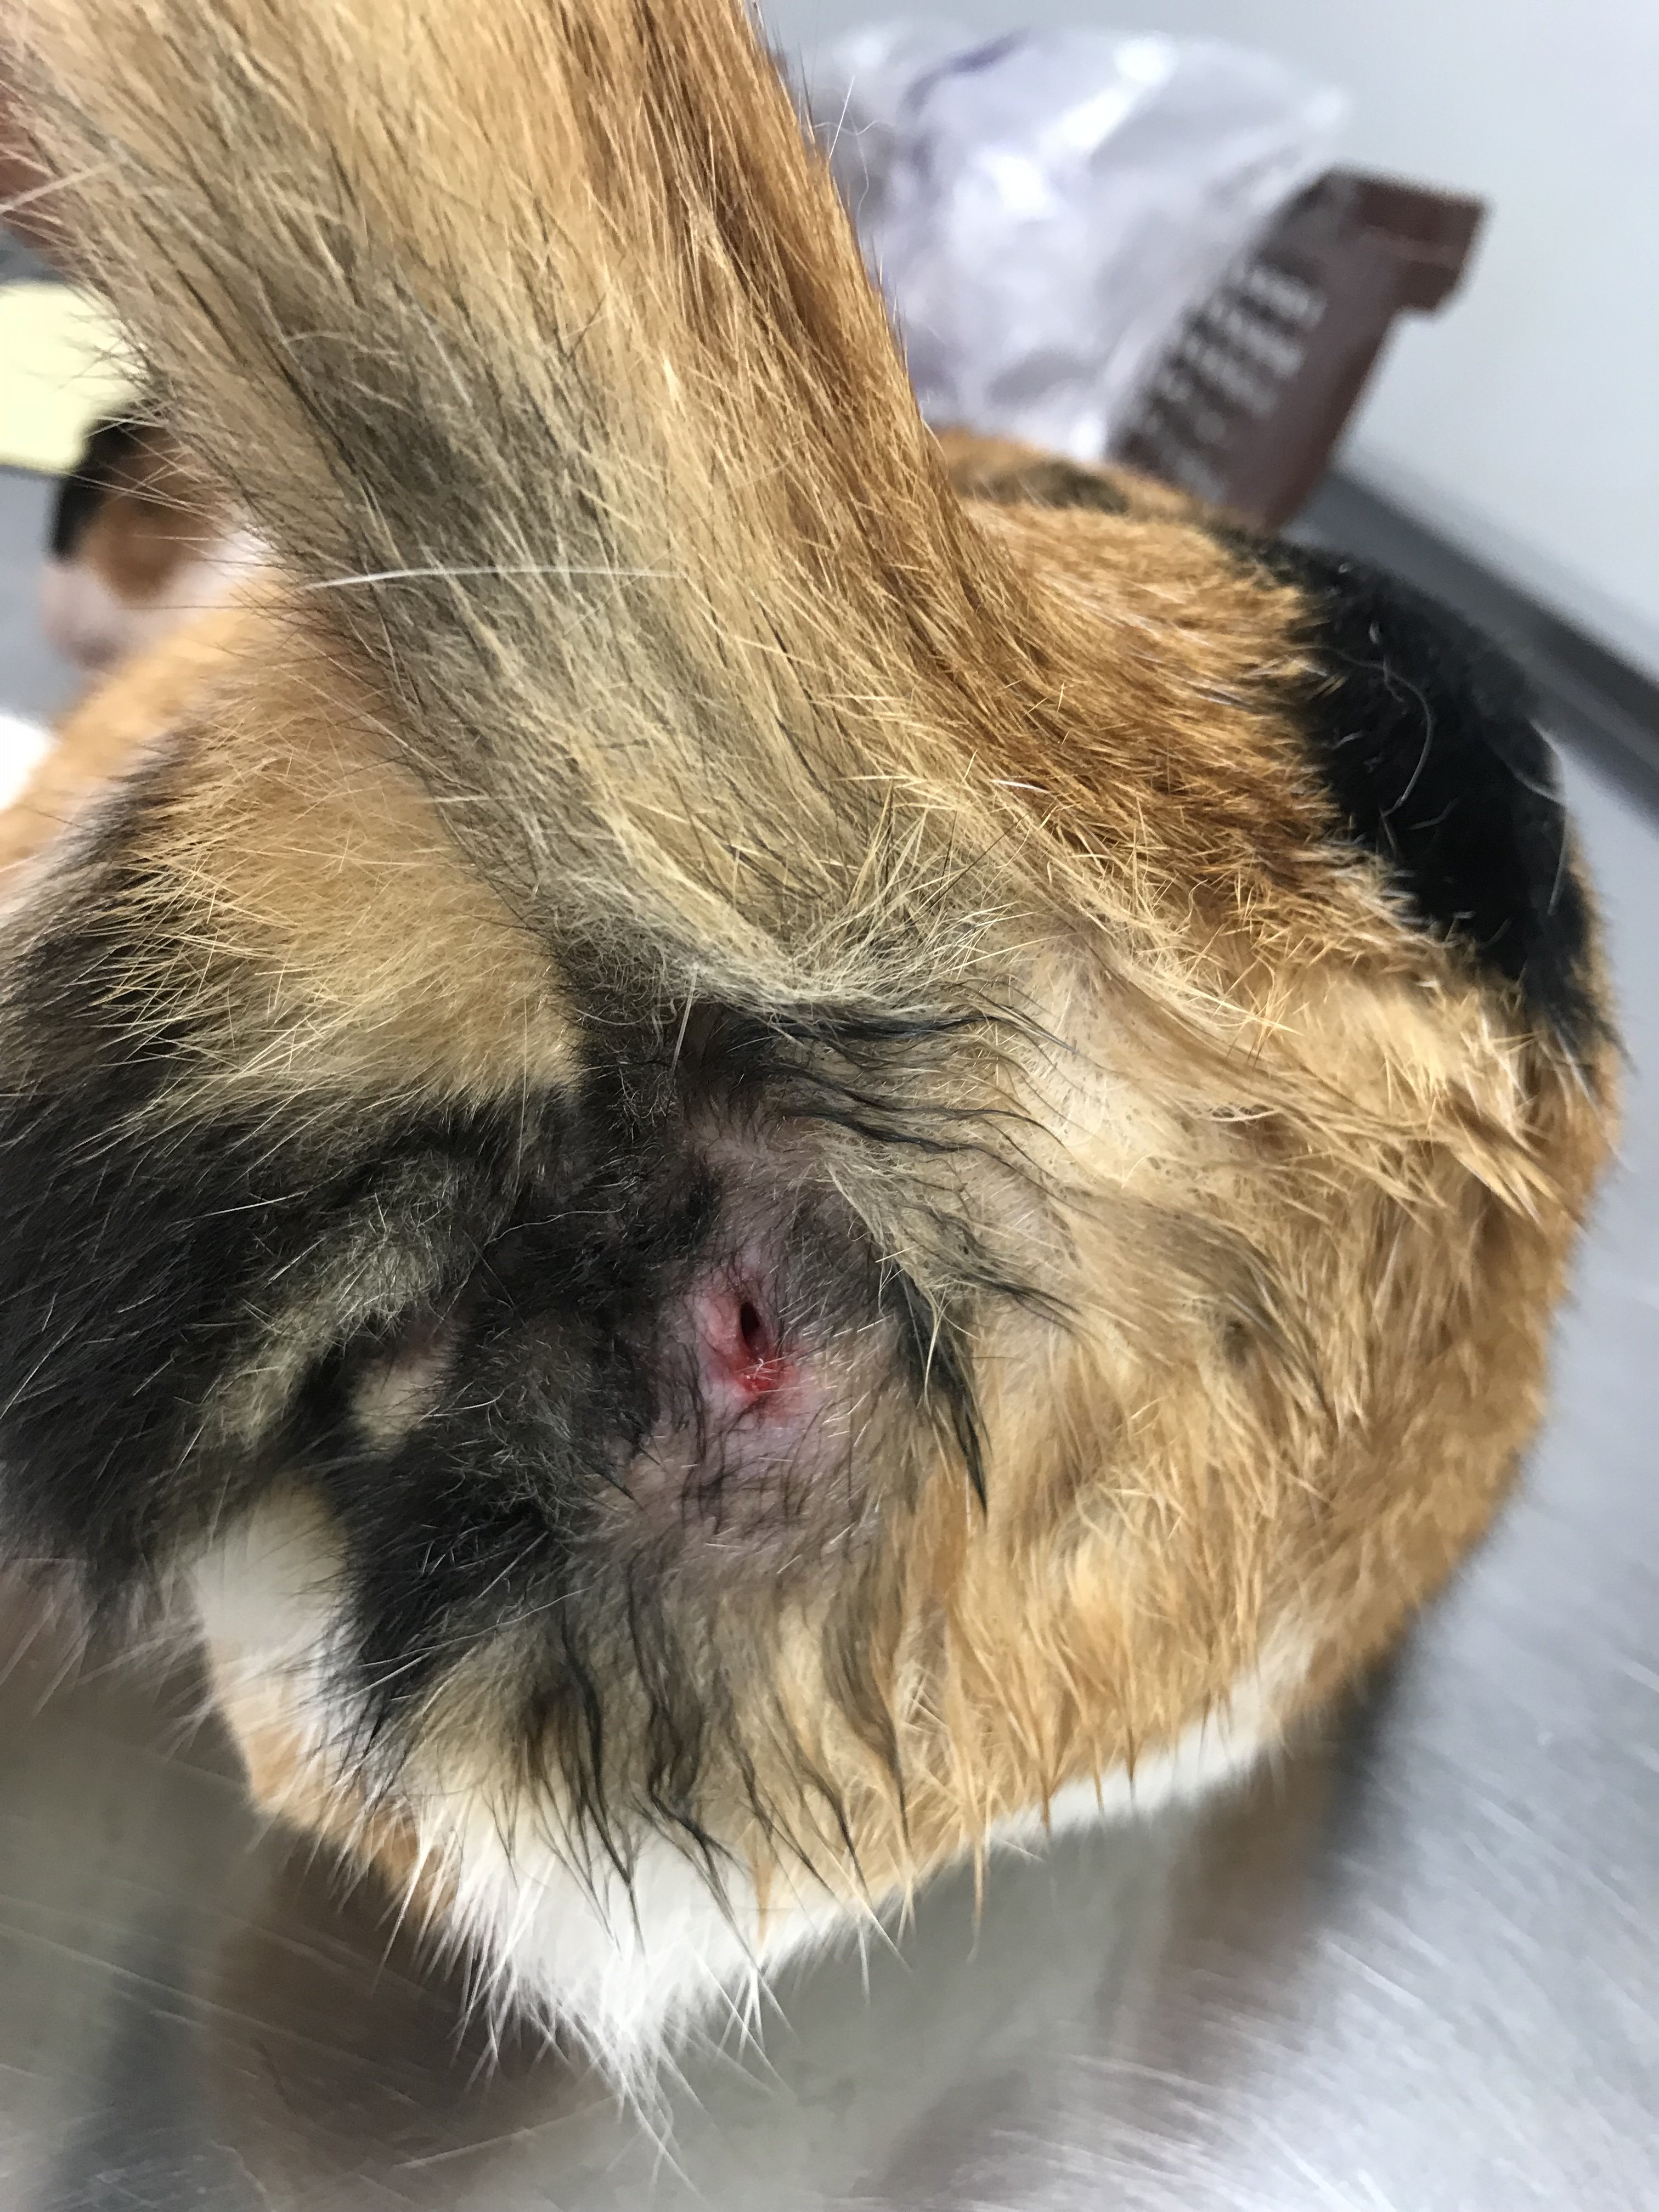 Does This Look Infected? Abscess Not Healing TheCatSite